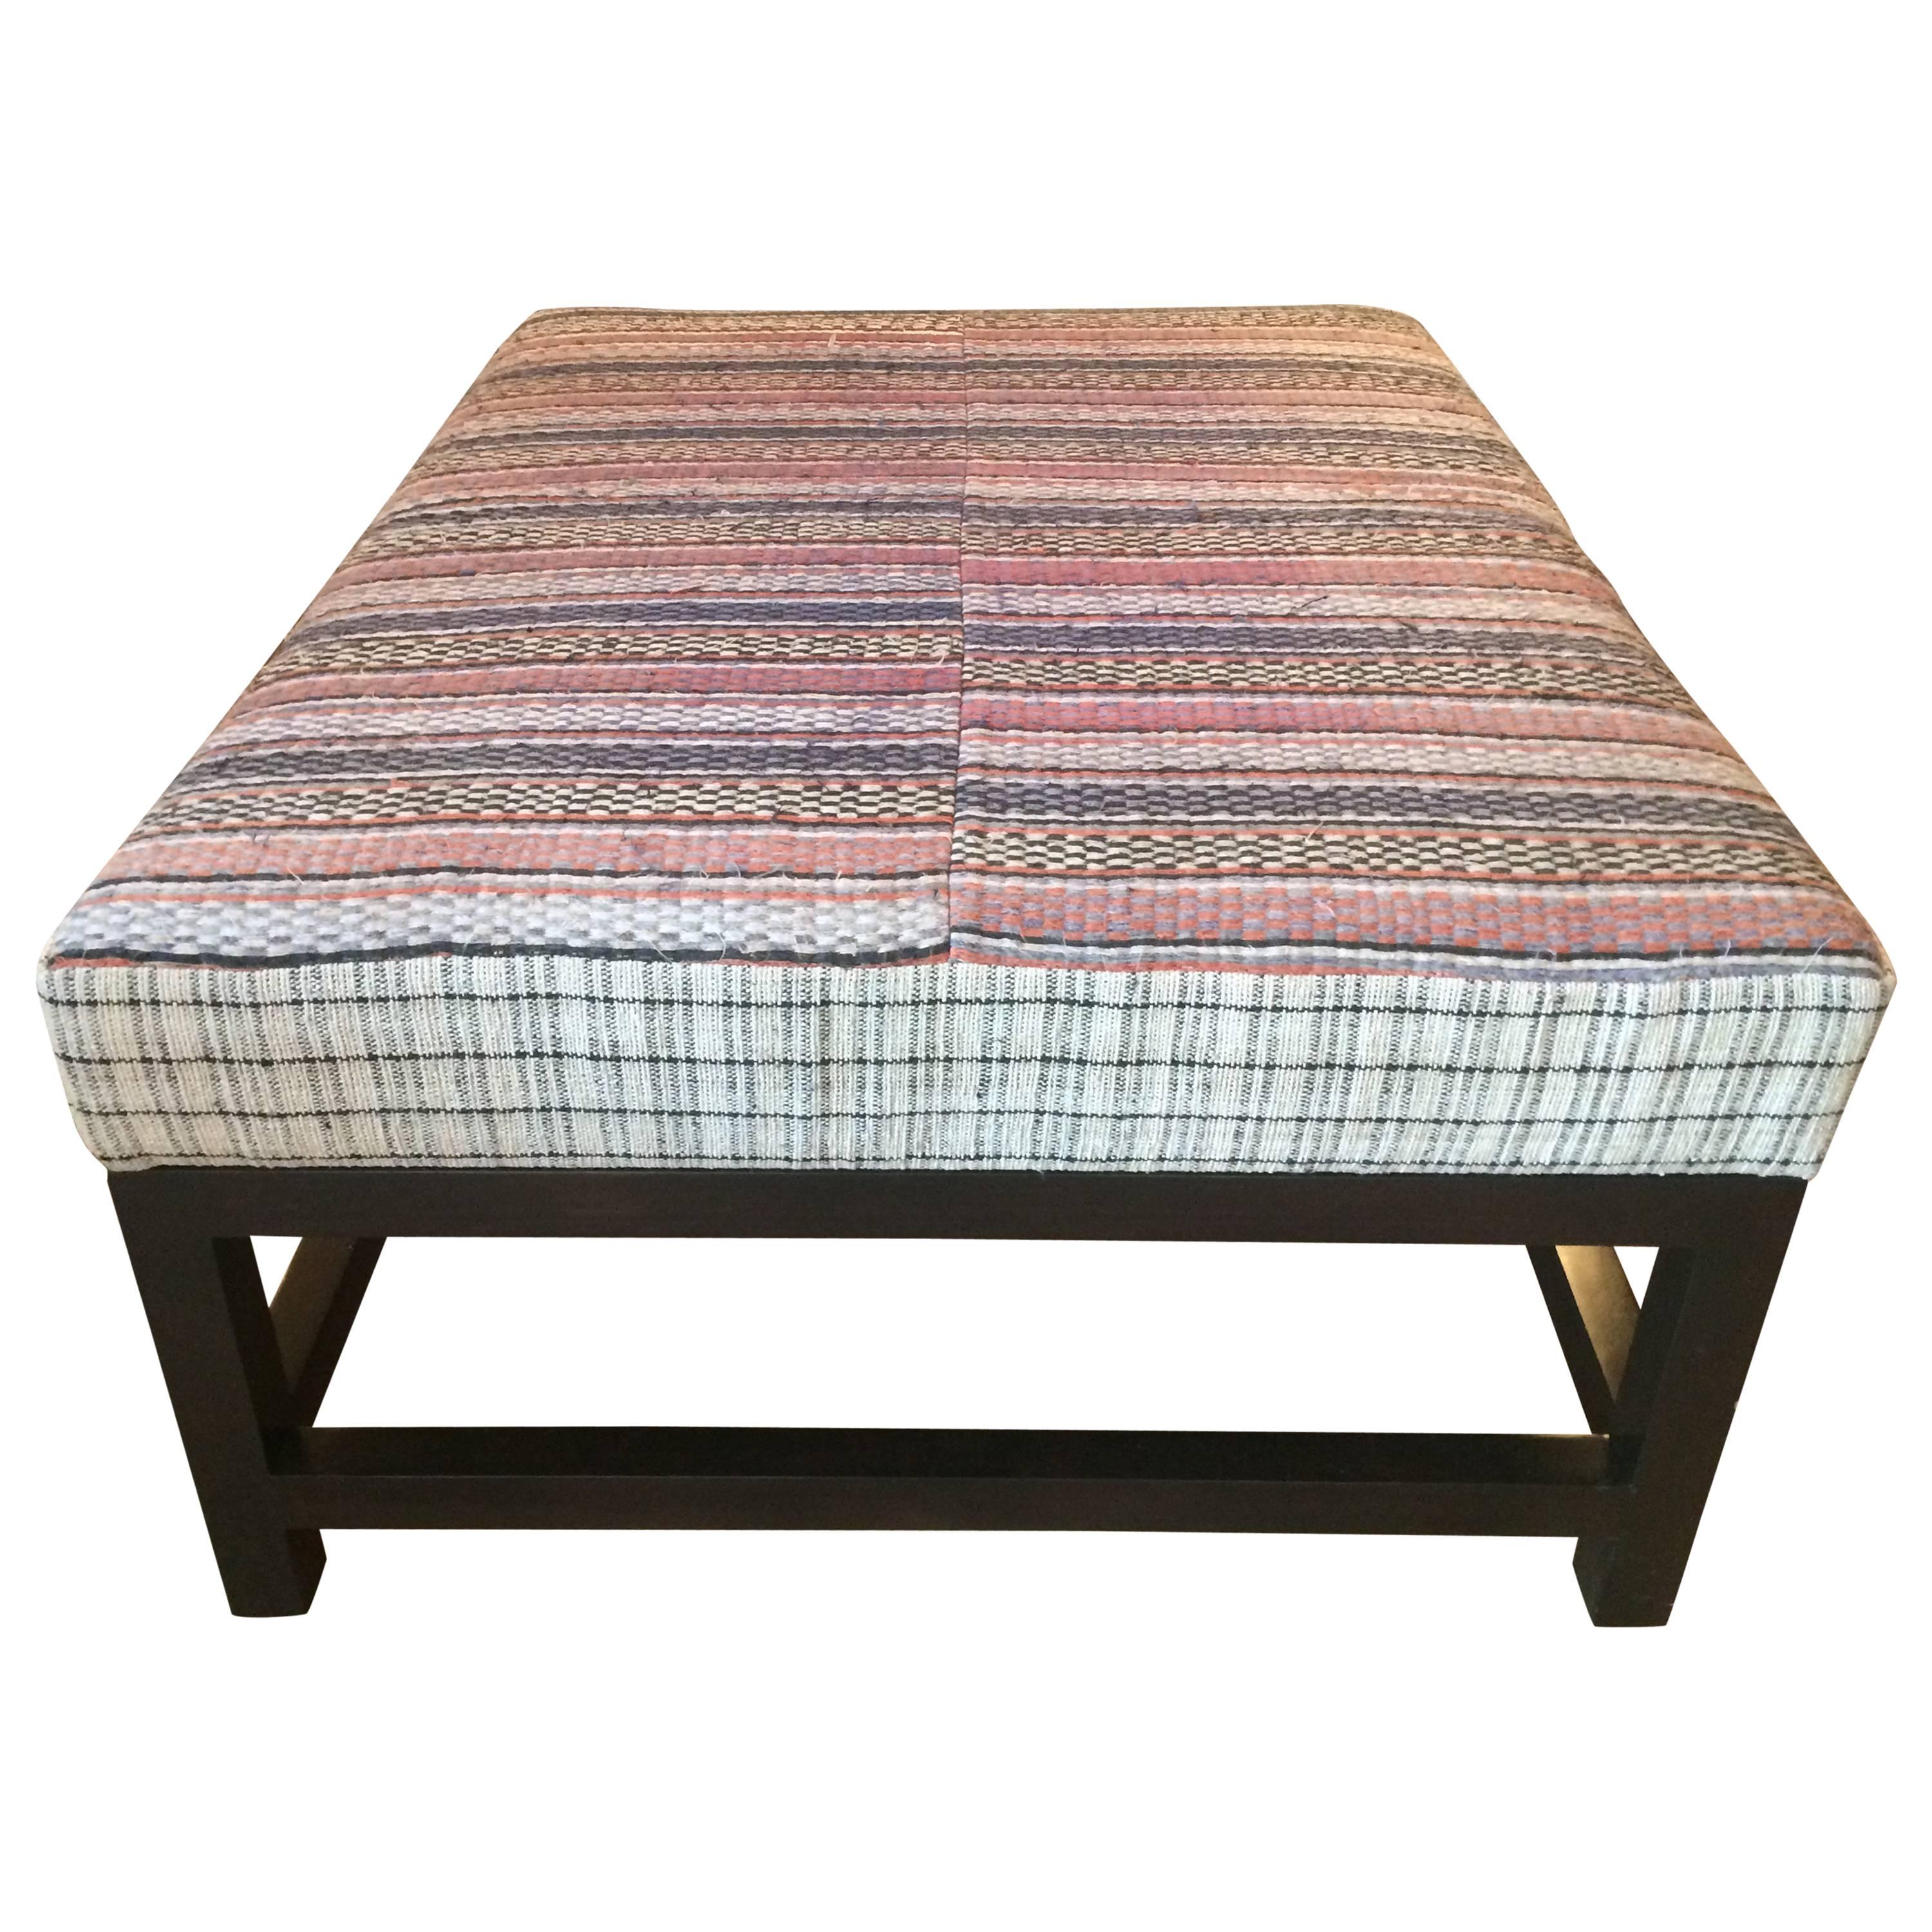 Large Ottoman by Nathan Turner, Upholstered with Vintage Mattress Fabric